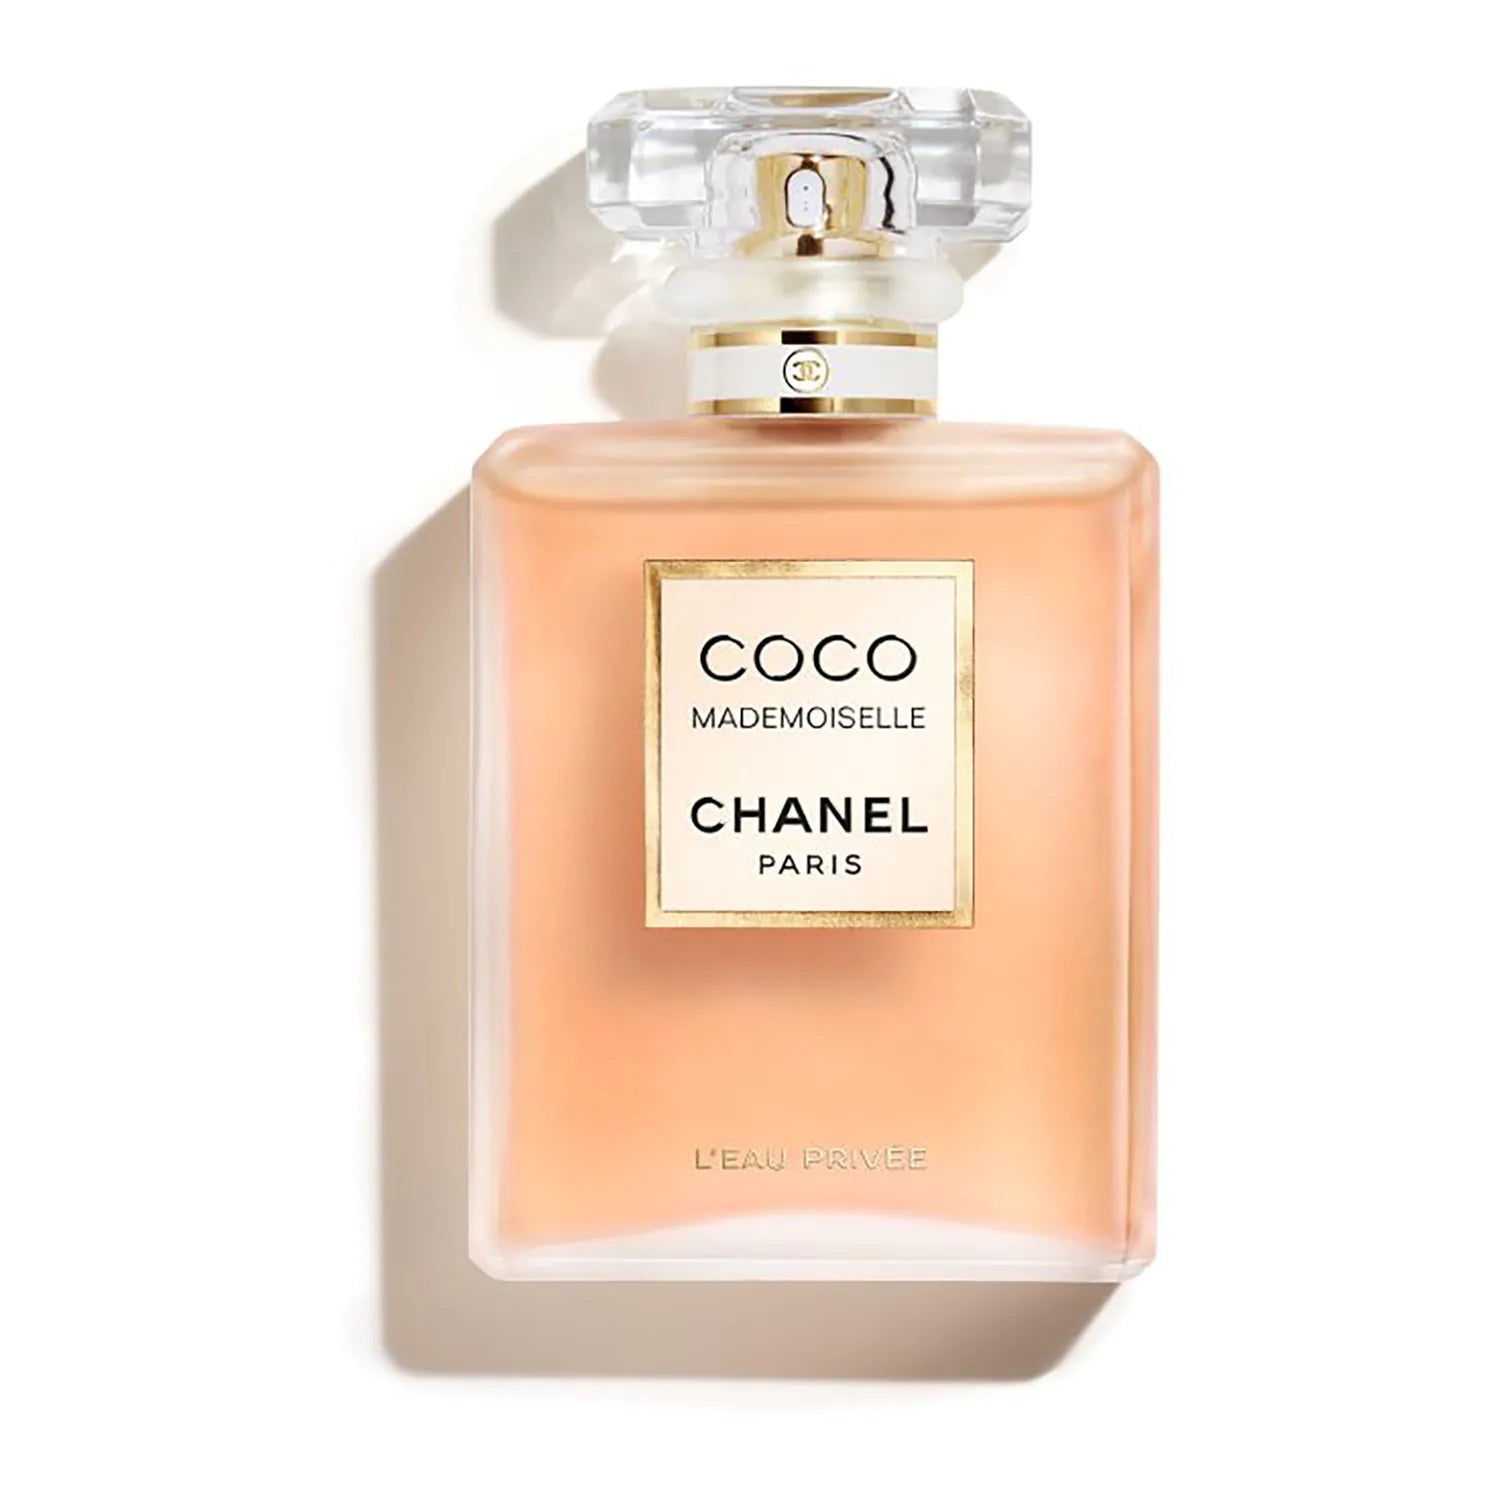 Creed Wind Flowers vs Chanel Coco Mademoiselle ~ Fragrance Reviews